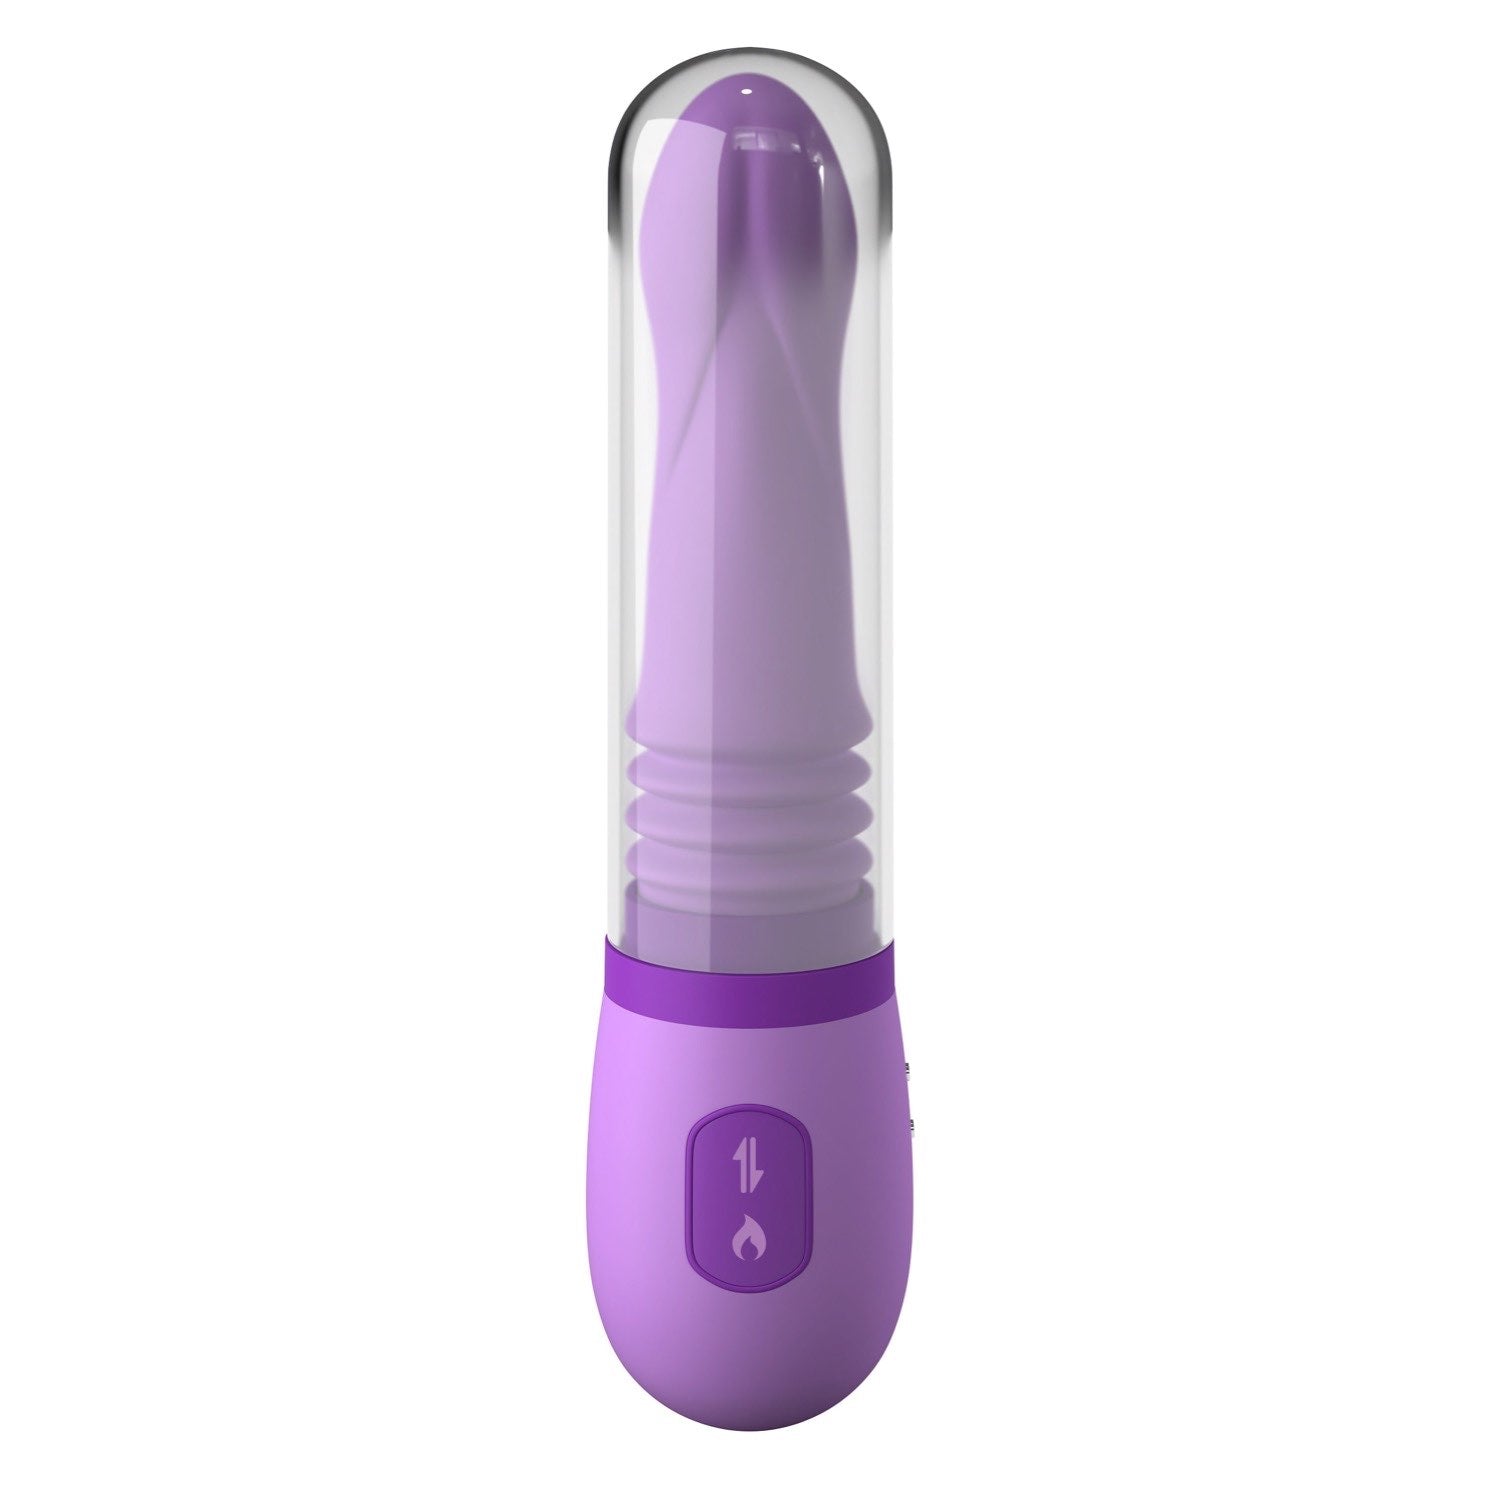 Fantasy For Her Personal Sex Machine - Purple 21.3 cm (8.5&quot;) USB Rechargeable Thrusting &amp; Gyrating Vibrator by Pipedream